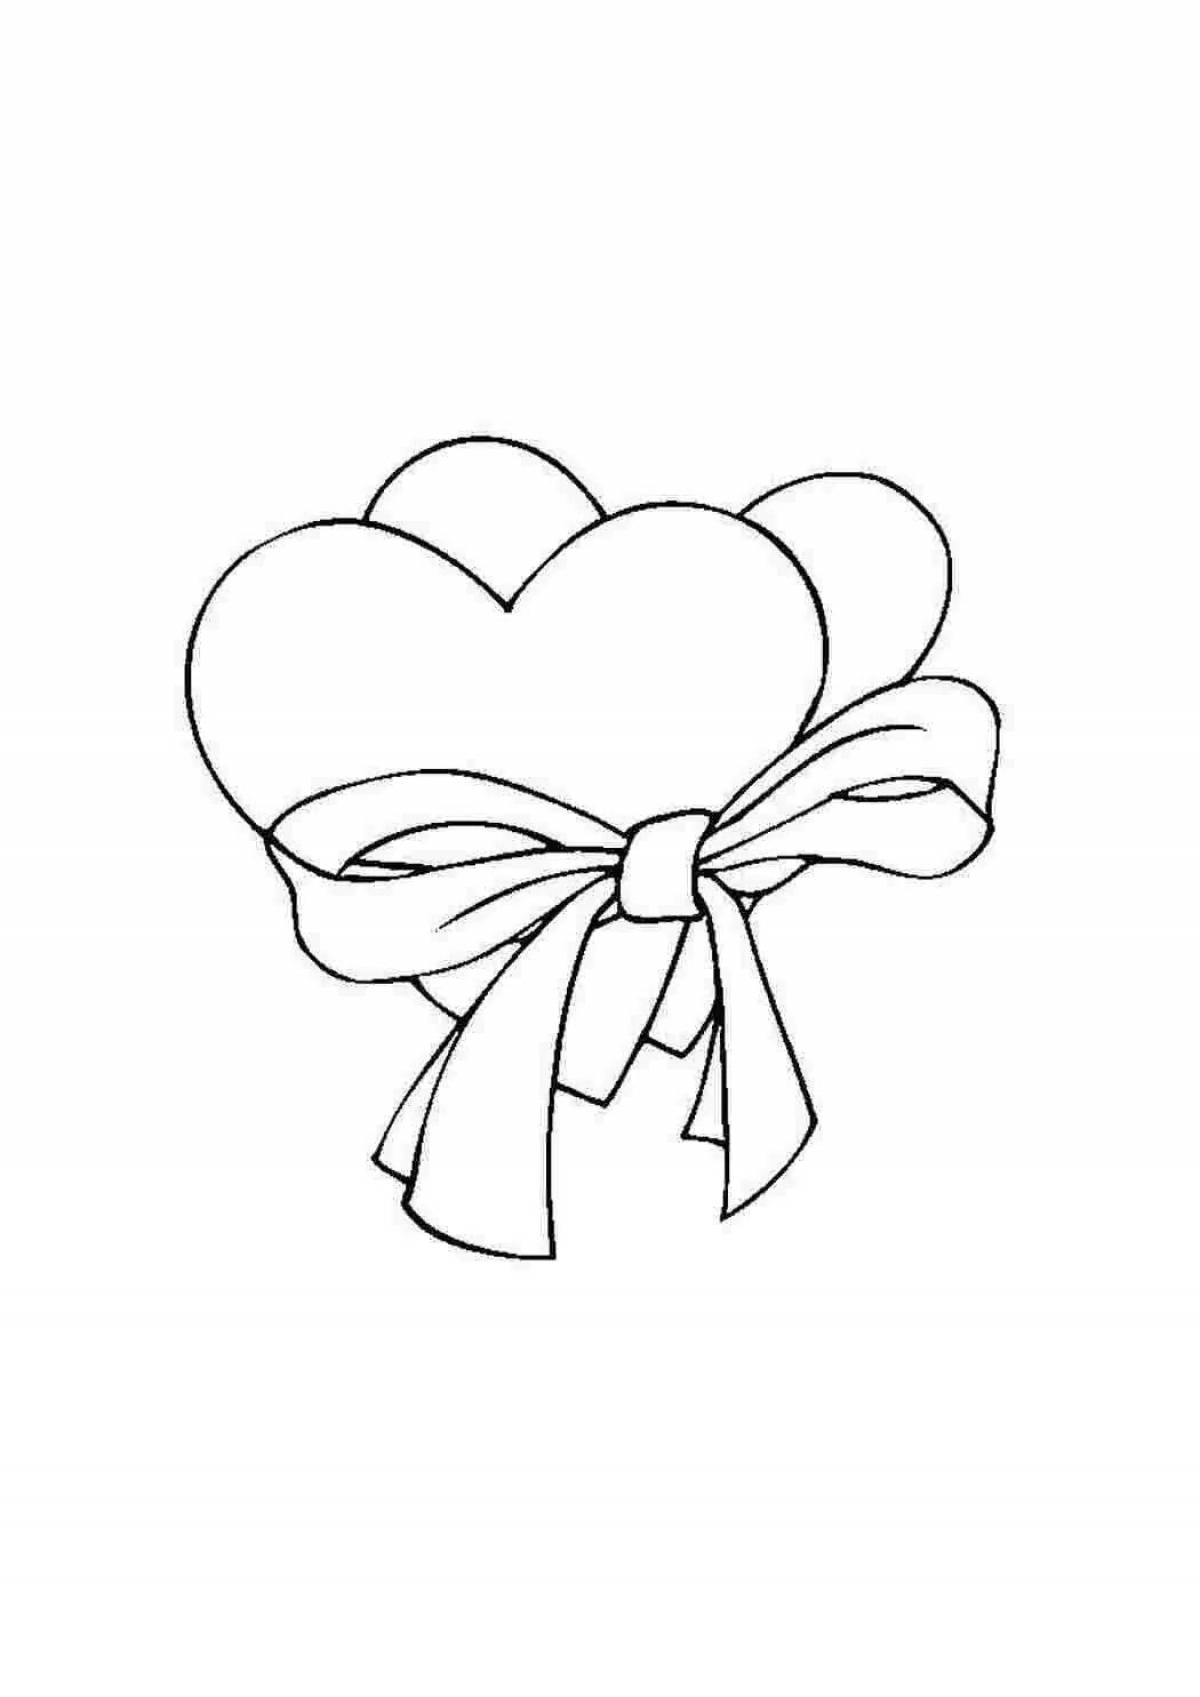 Great bow coloring book for kids